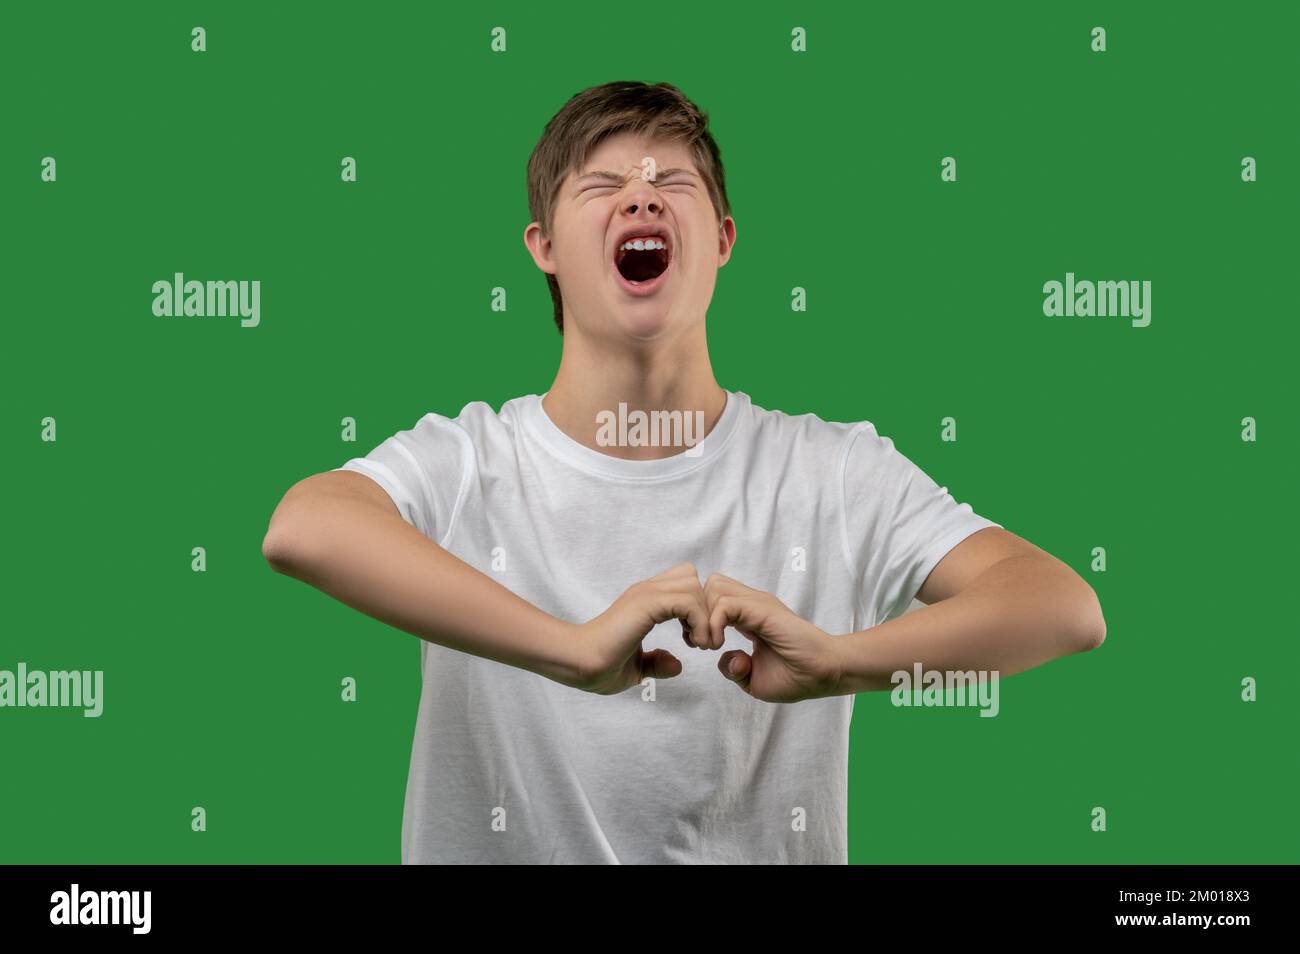 Waist-up portrait of an emotional teenager shouting with his eyes closed and making a hand gesture. Stock Photo